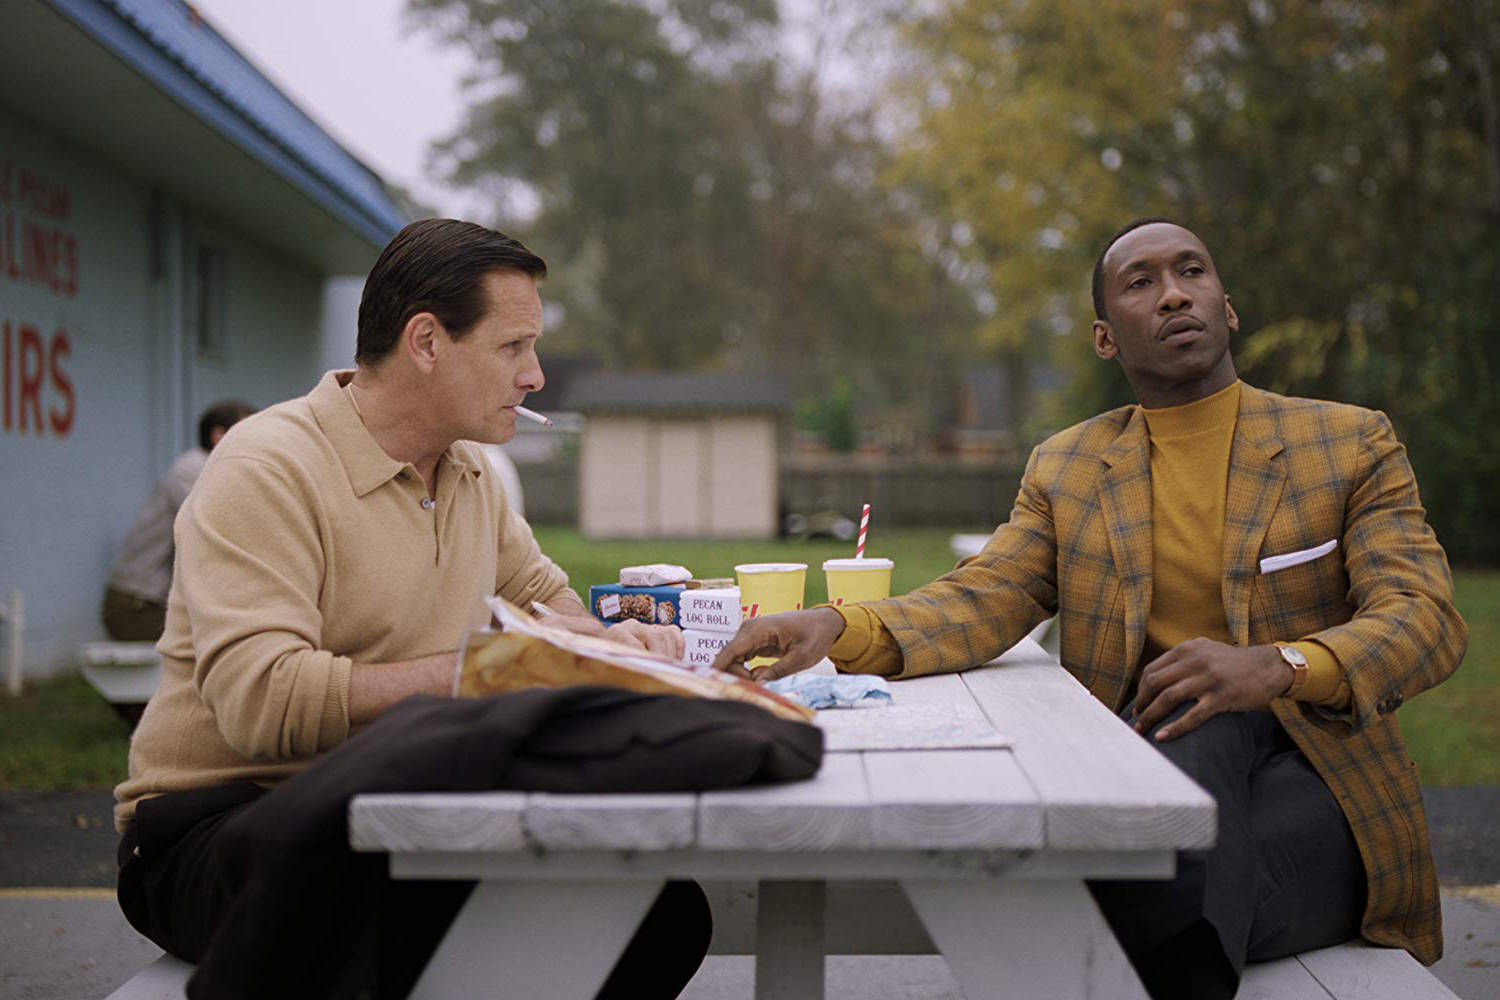 Now Playing: ‘Green Book’ tells a moving story about looking past bias